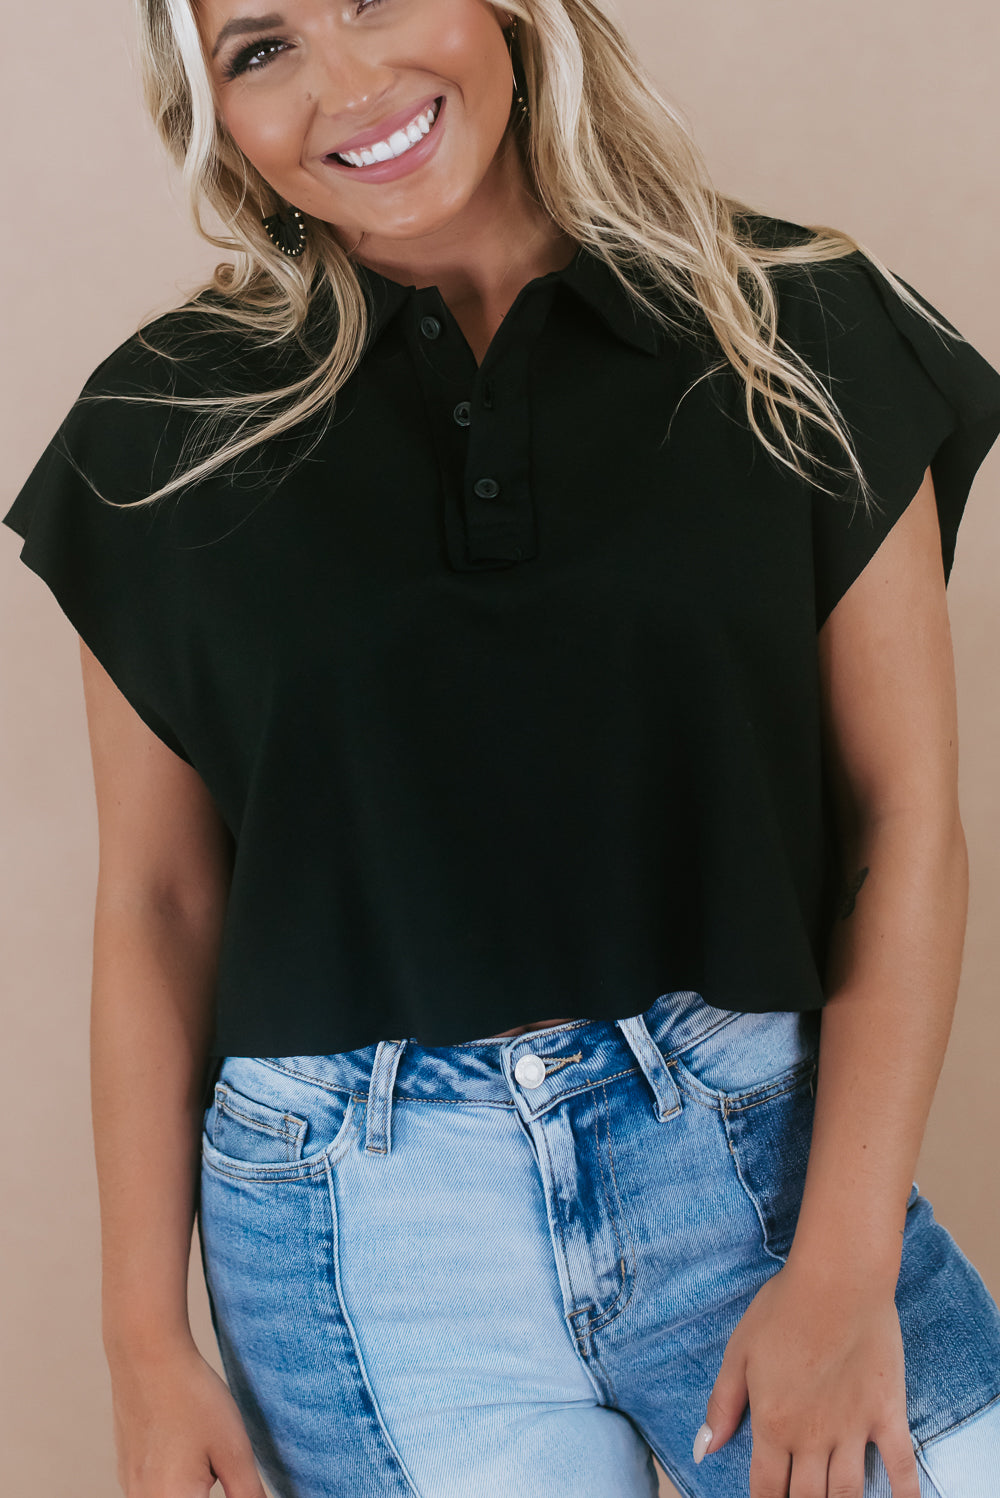 Making A Statement Oversized Top, Black